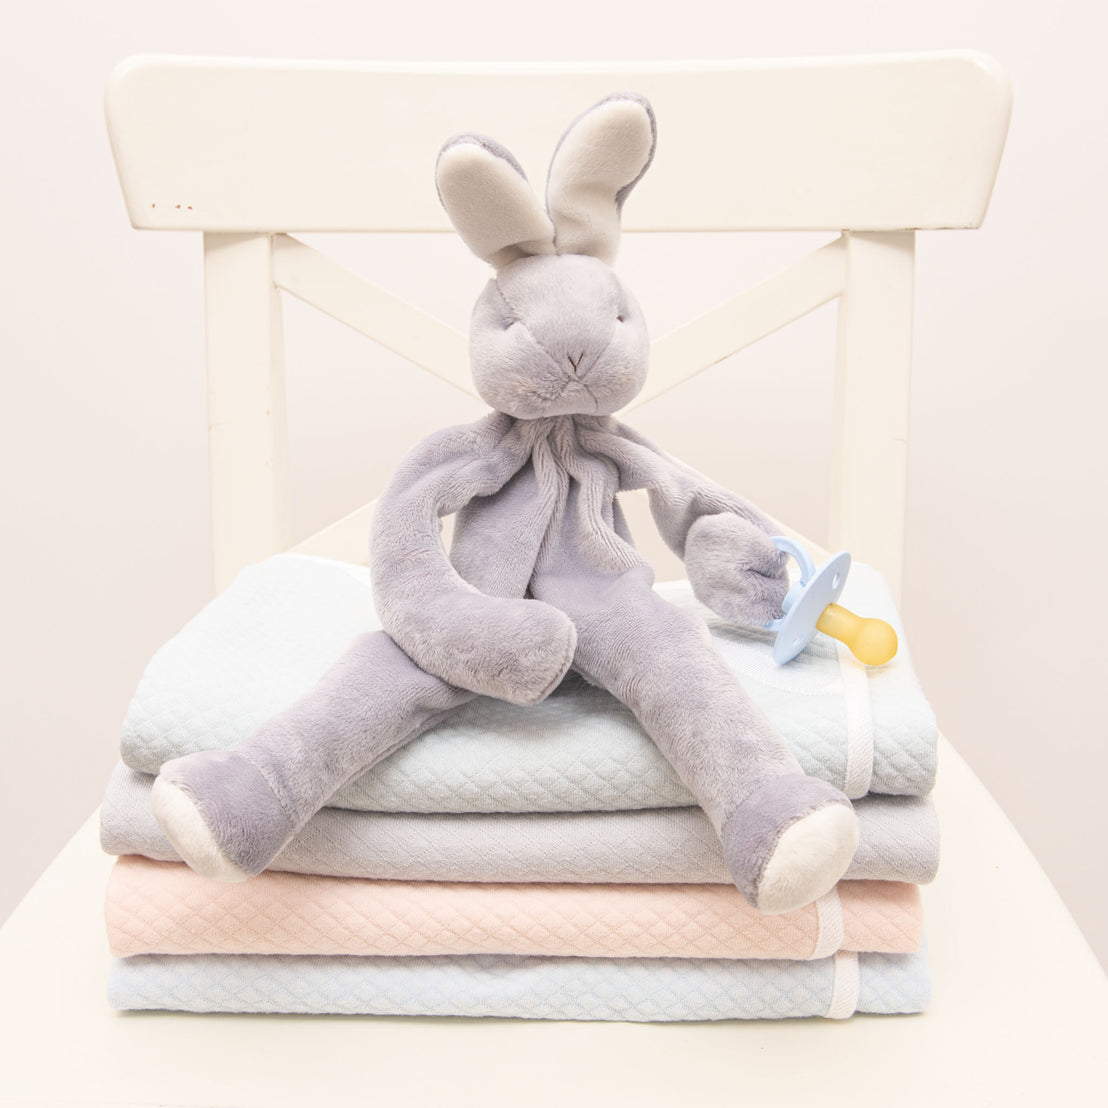 Asher Silly Bunny Buddy | Pacifier Holder